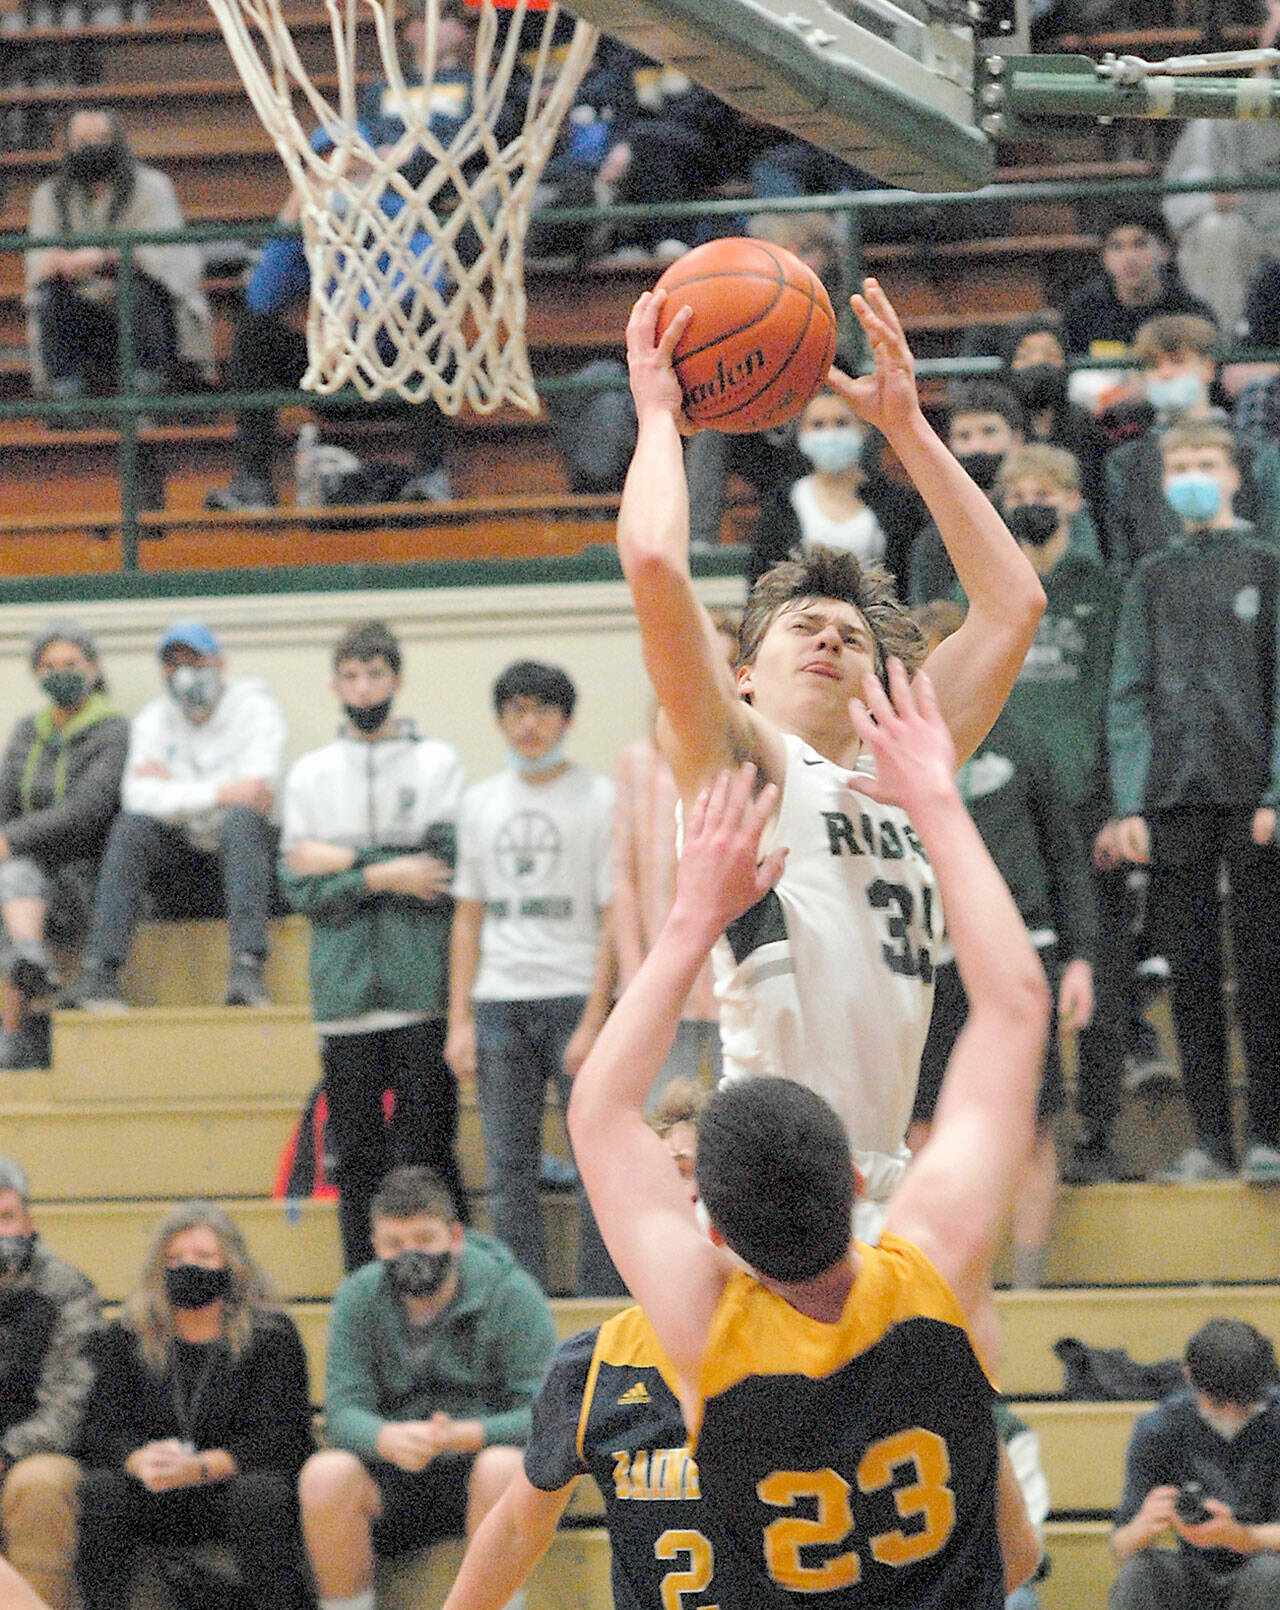 Port Angeles’ Parker Nickerson, top, take aim at the basket as Bainbridge Island’s James Carey defends the lane on Tuesday in Port Angeles. (Keith Thorpe/Peninsula Daily News)